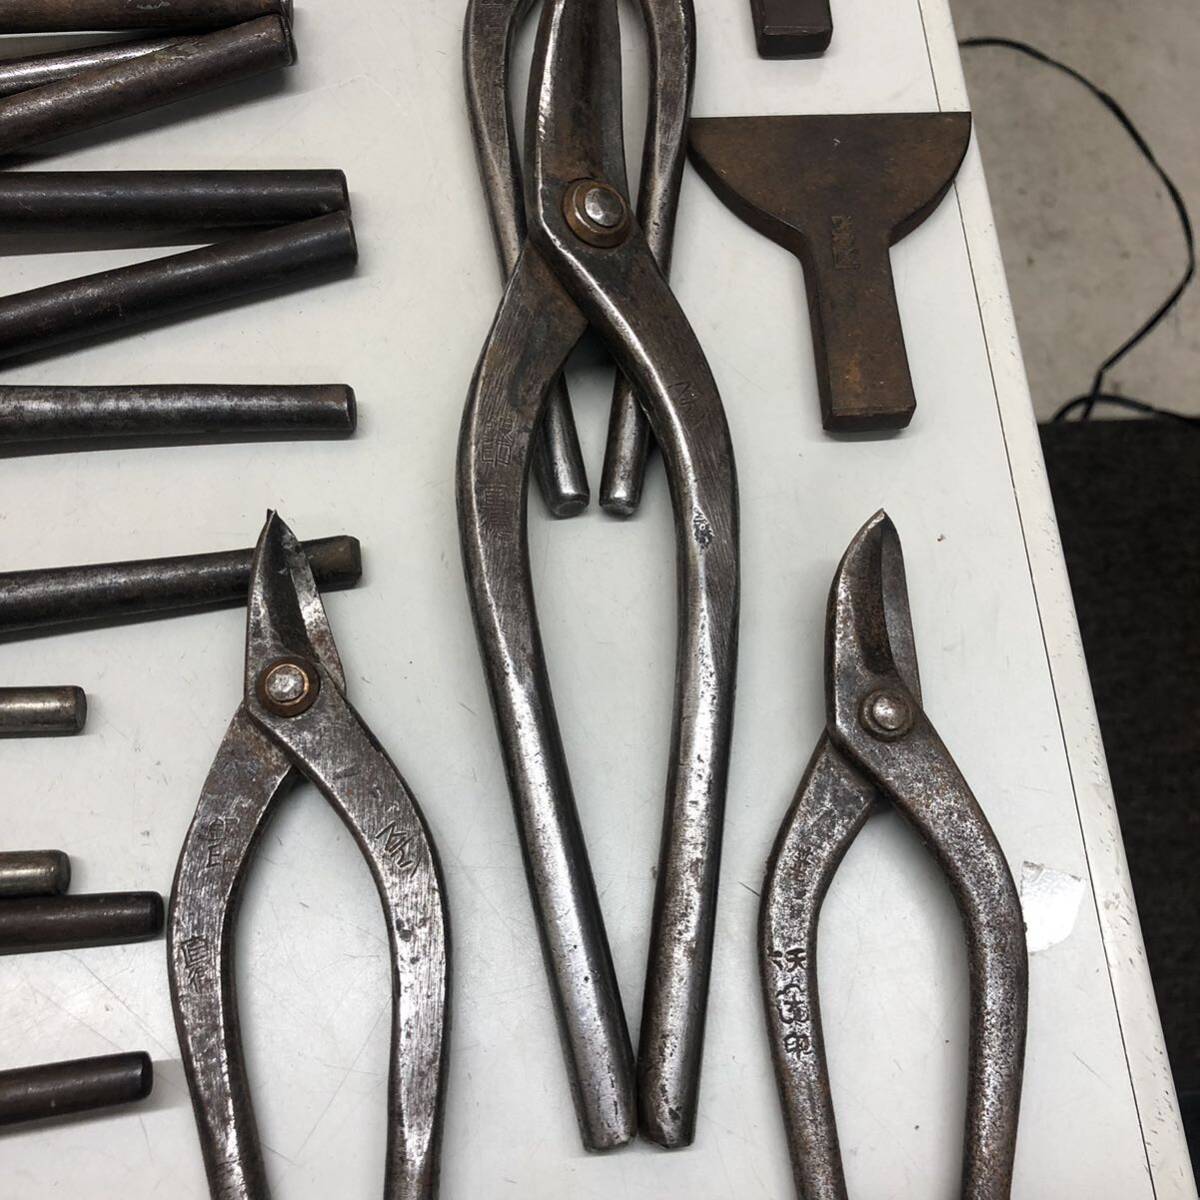  metal plate tool scissors grip etc. various together tool box attaching used present condition goods carpenter's tool DIY